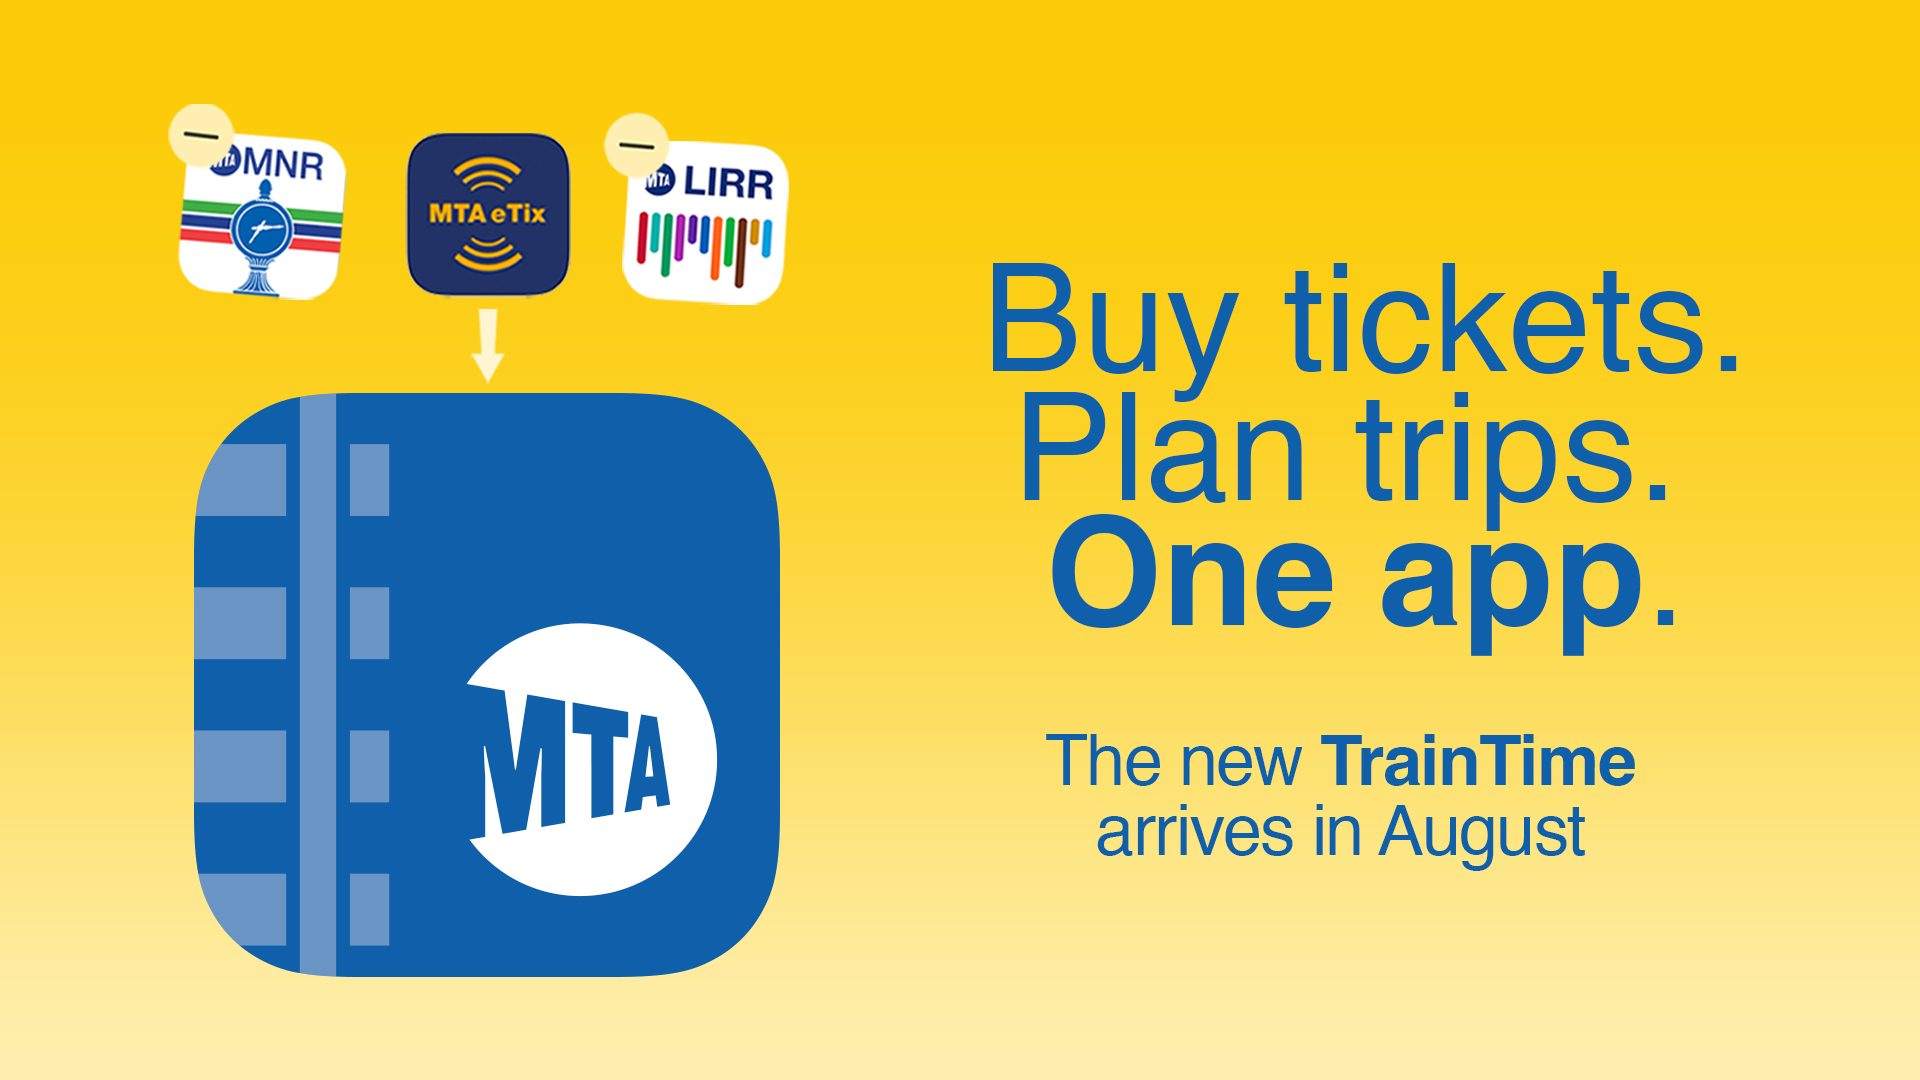 Coming soon: Buy railroad tickets and plan trips in one app